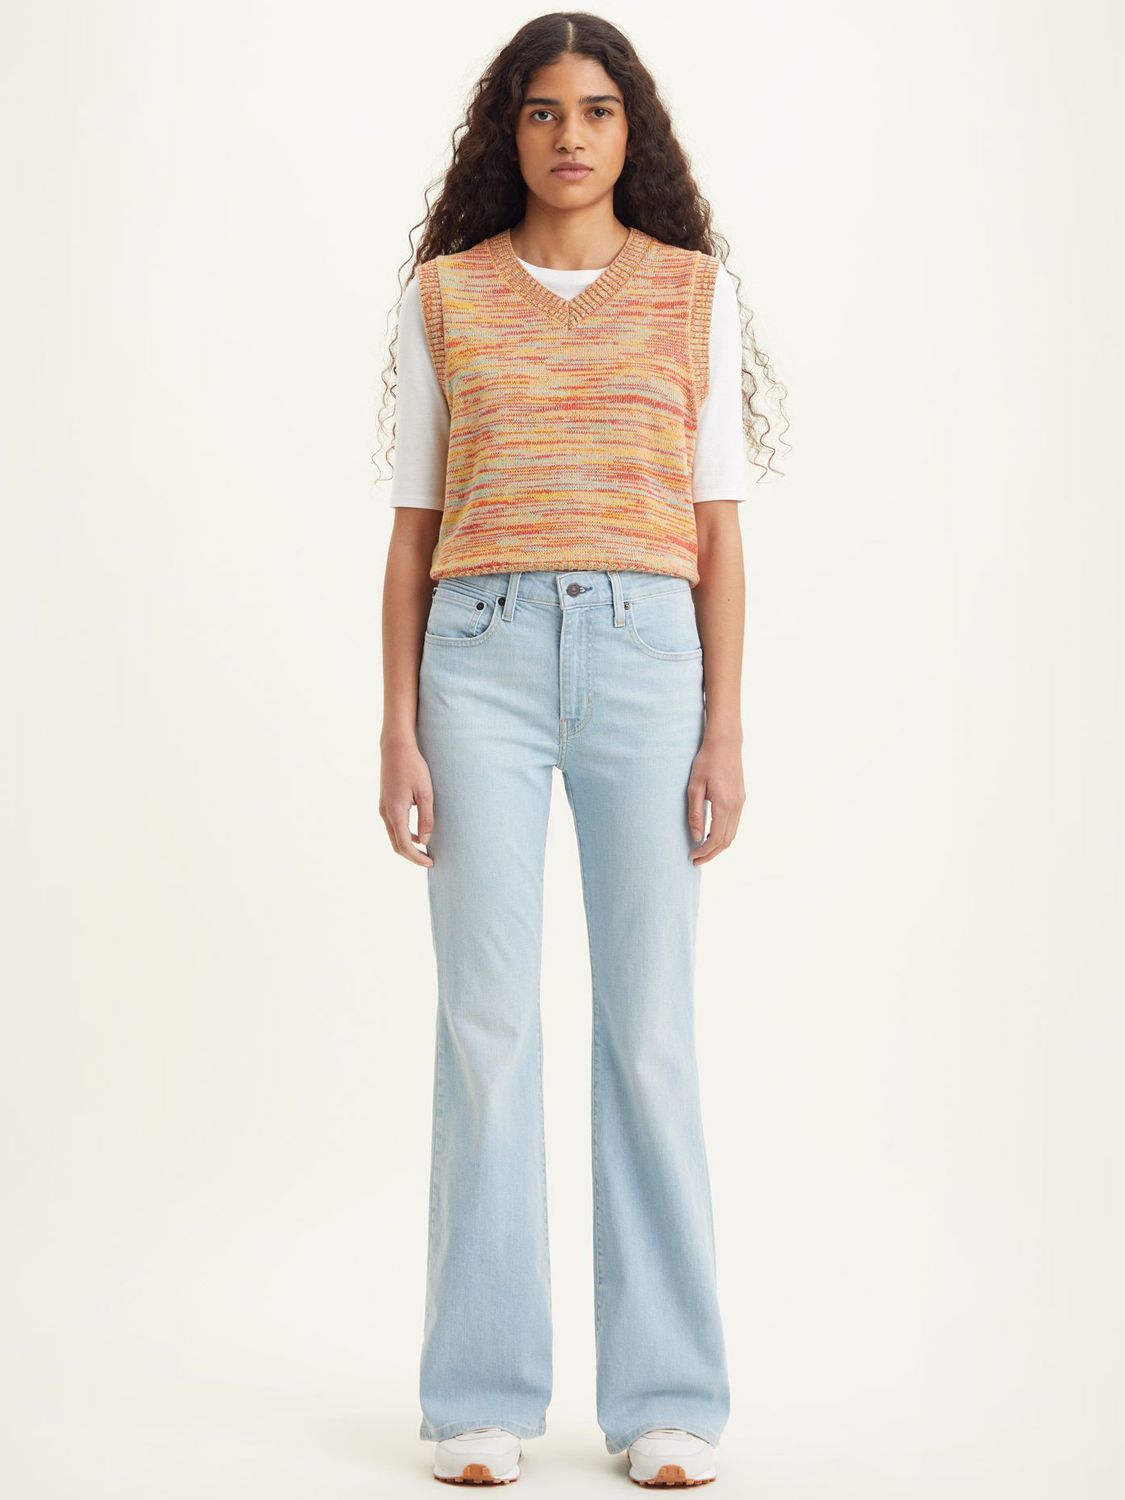 Levi's 726 High Rise Flare Jeans, Snatched at John Lewis & Partners